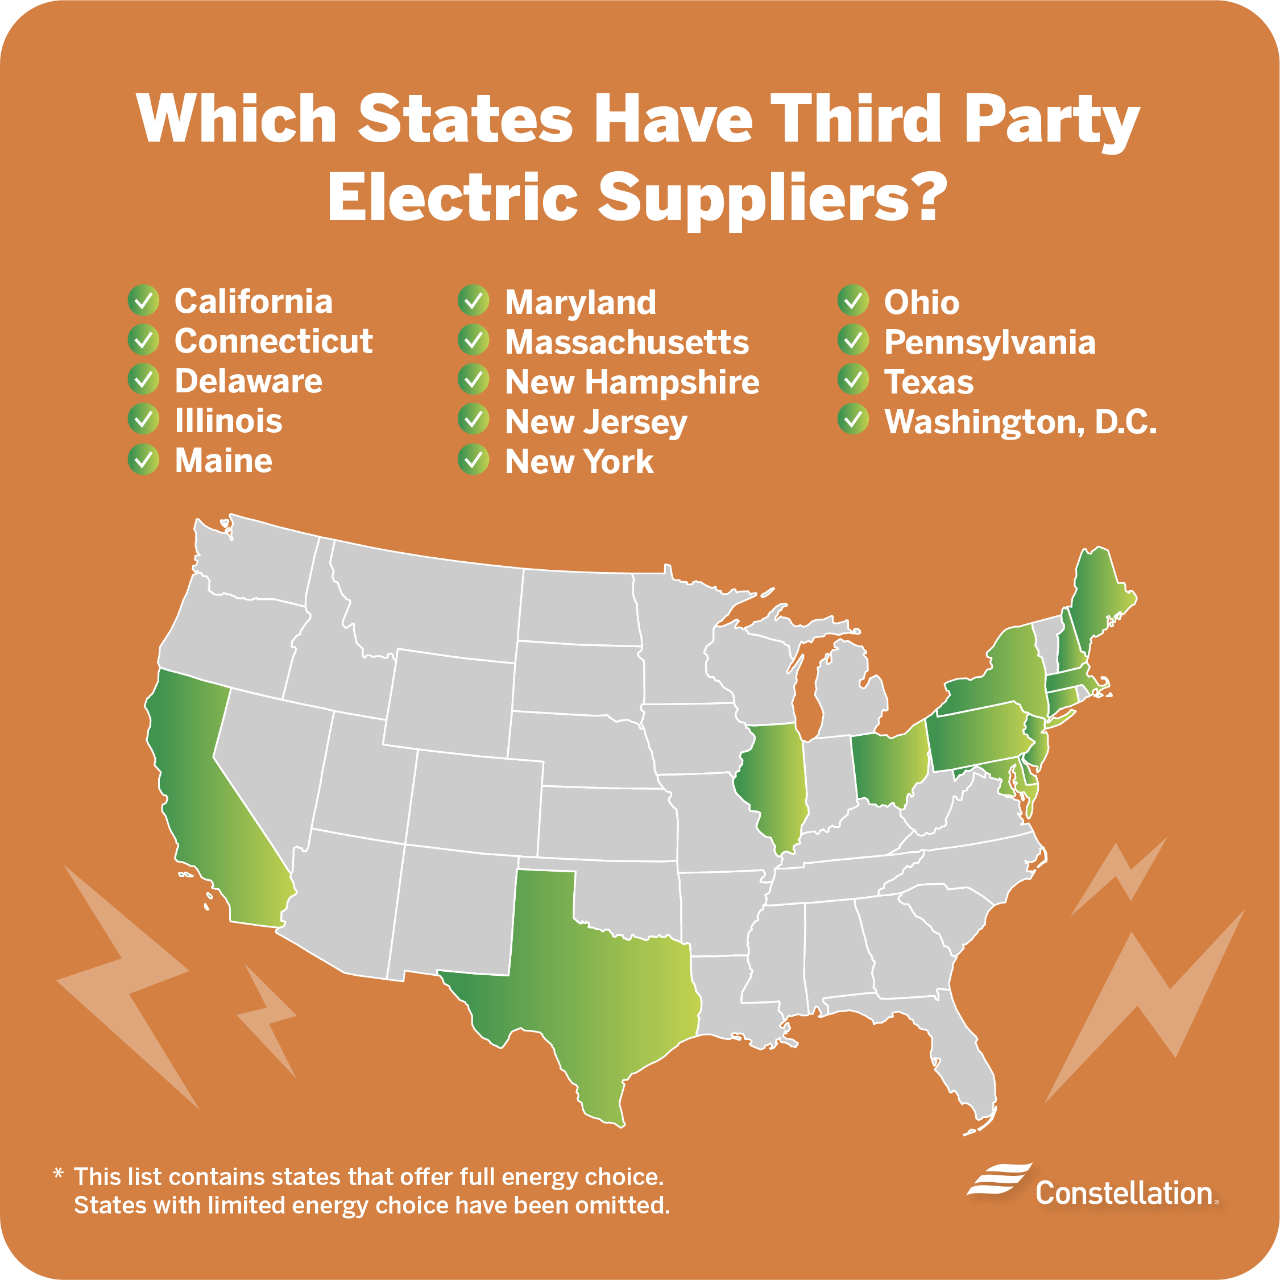 What states have third party electric suppliers?